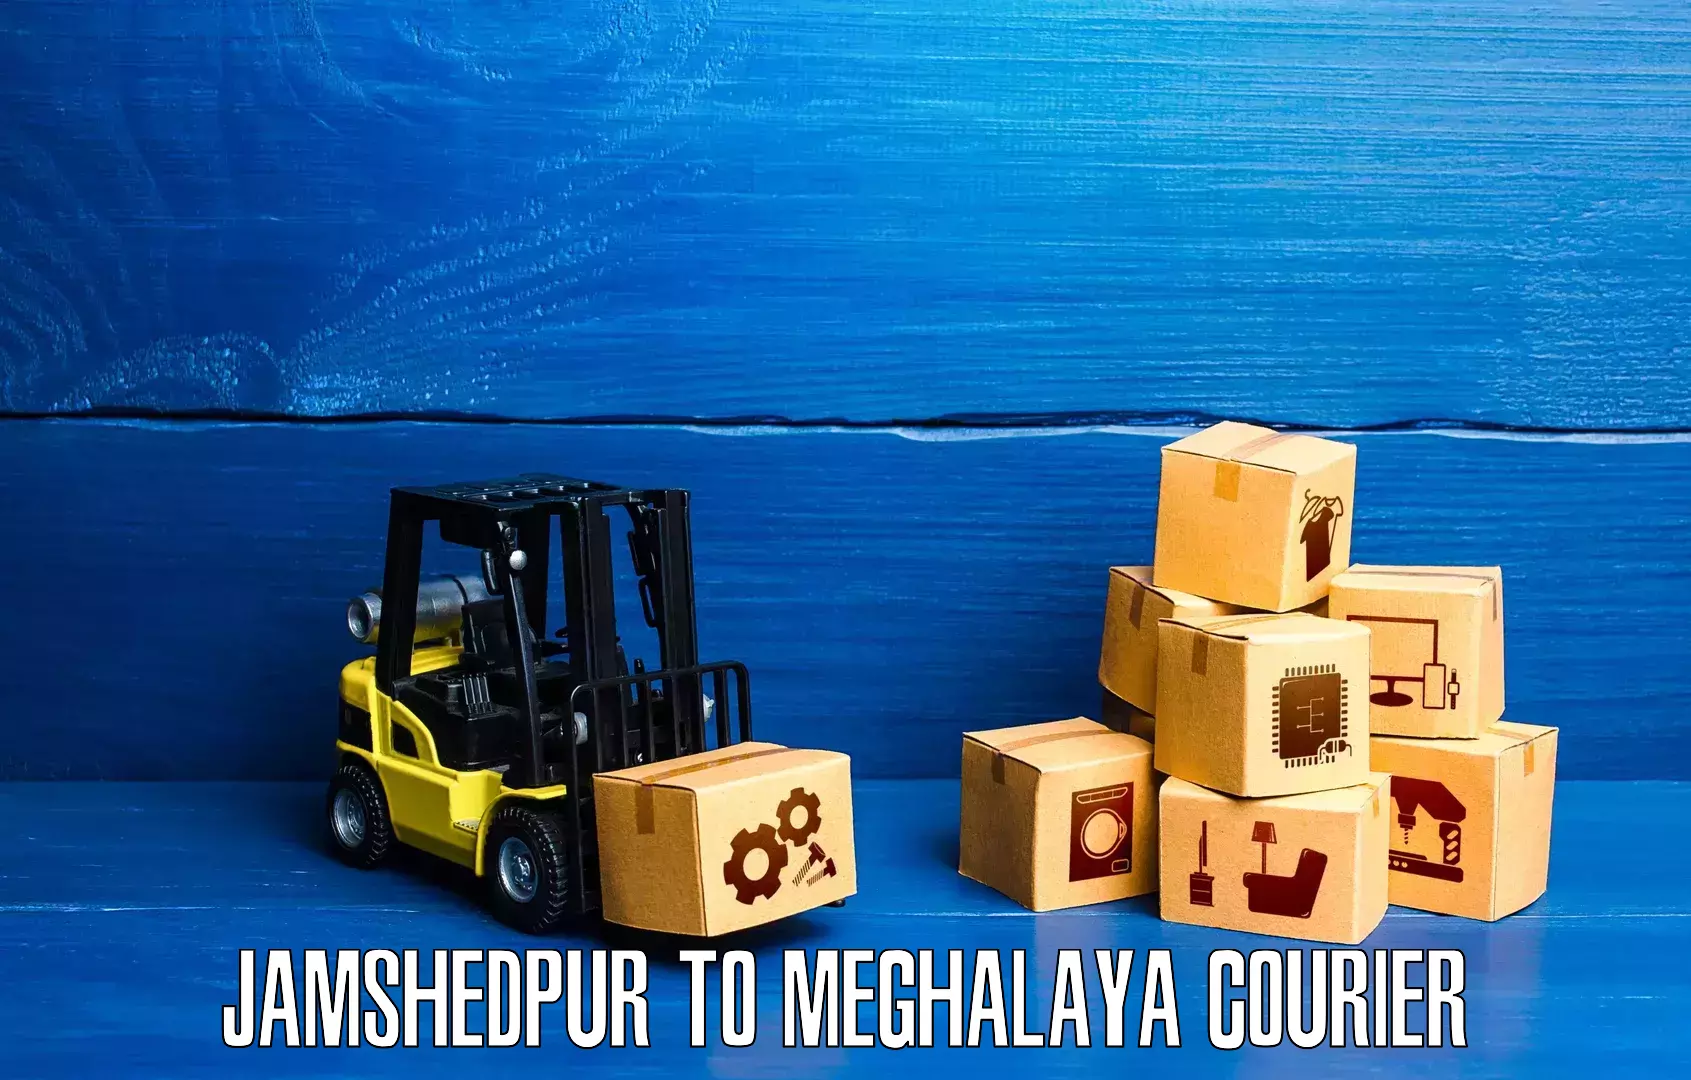 International courier networks Jamshedpur to Jowai